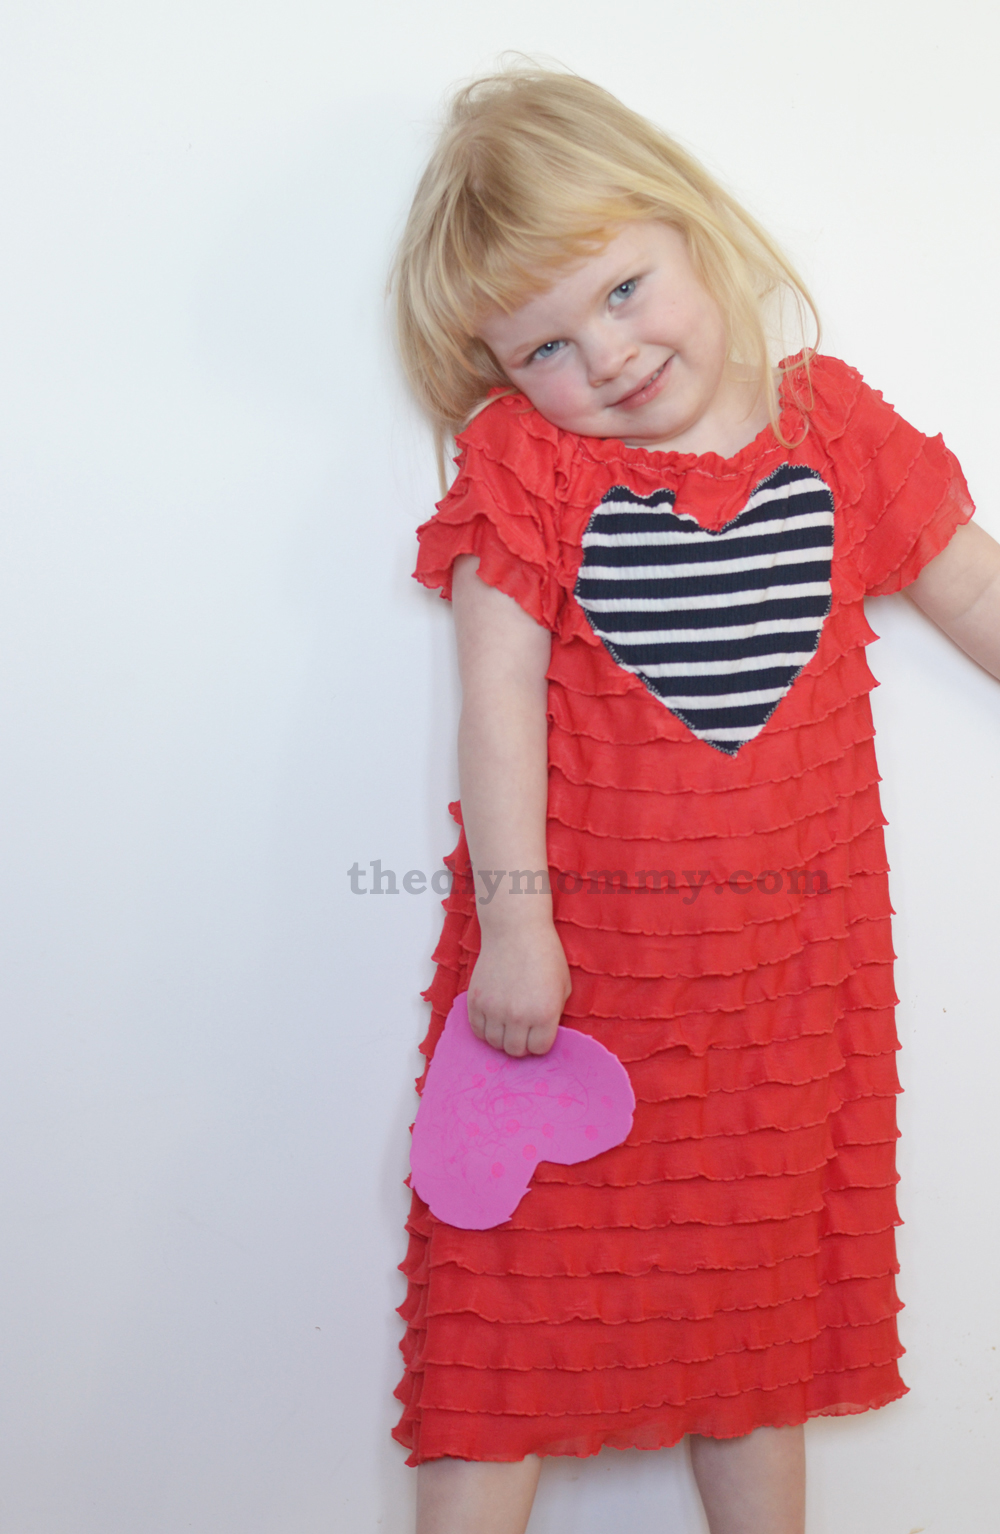 Sew an Easy Valentine Dress with Ruffle Fabric